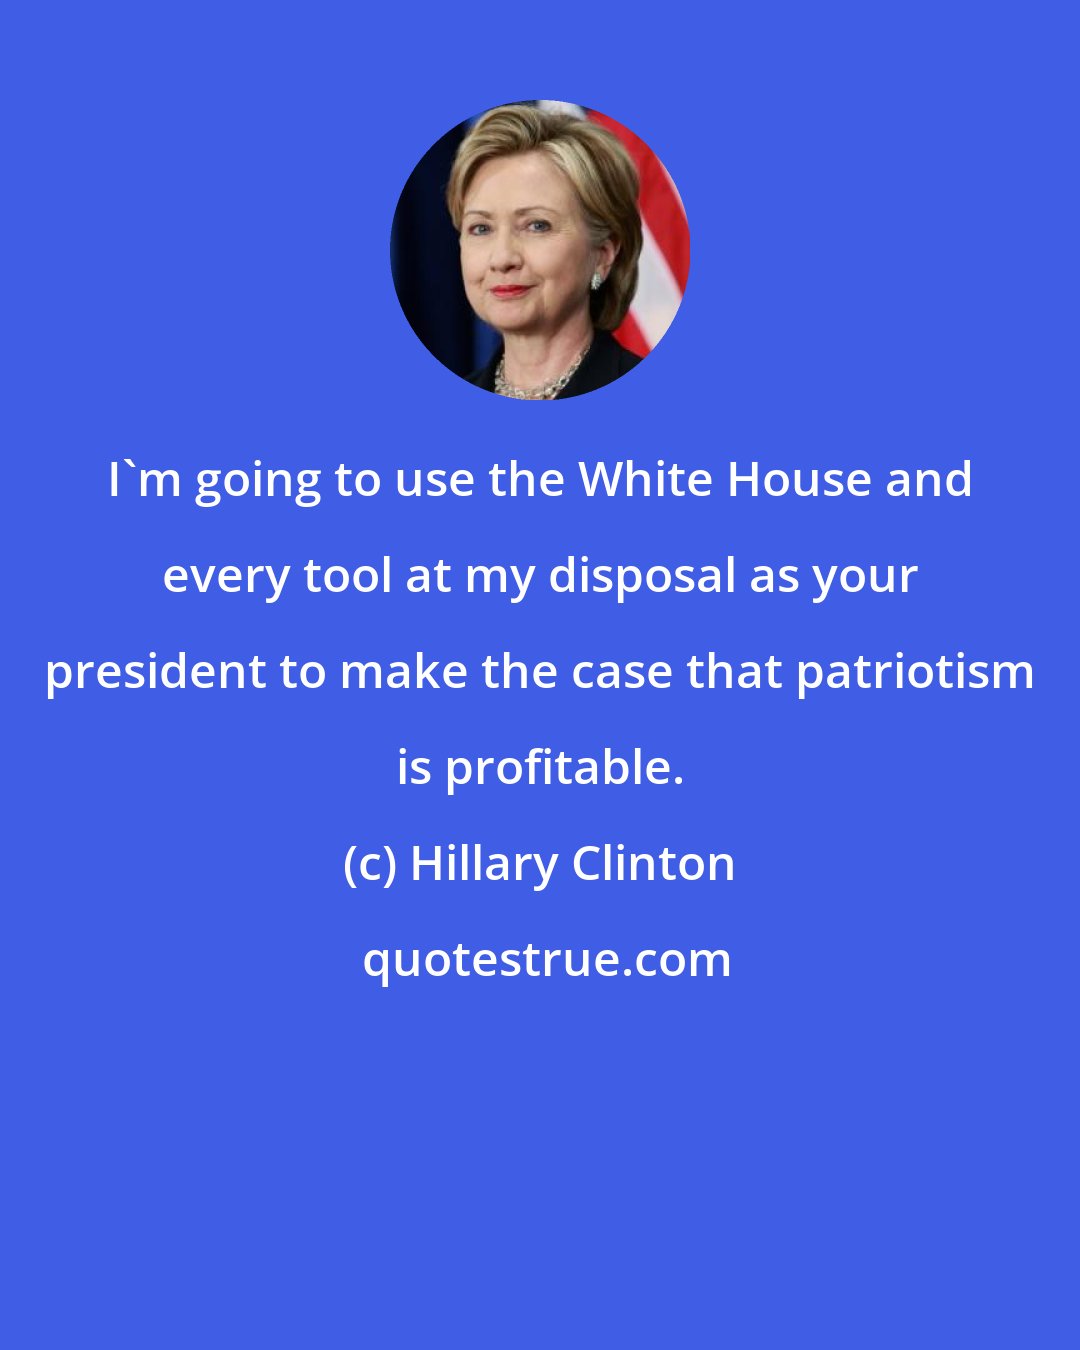 Hillary Clinton: I'm going to use the White House and every tool at my disposal as your president to make the case that patriotism is profitable.